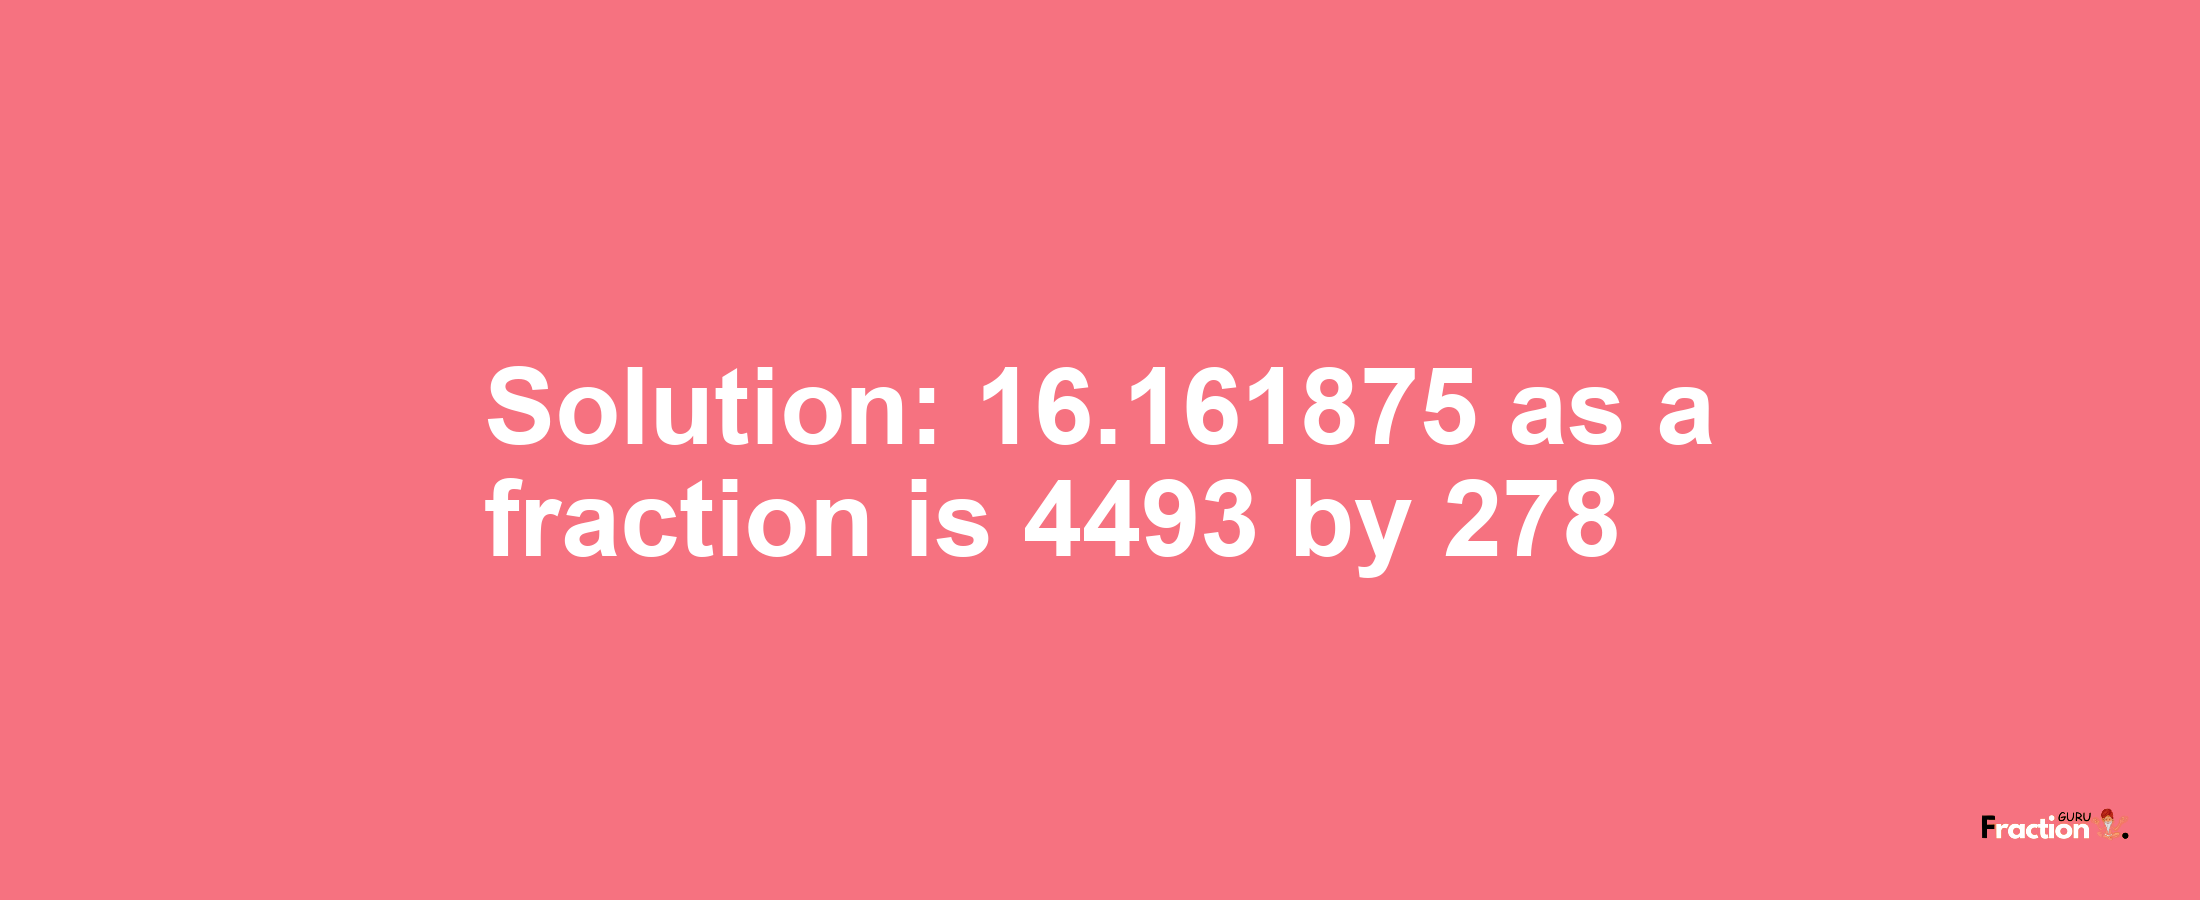 Solution:16.161875 as a fraction is 4493/278